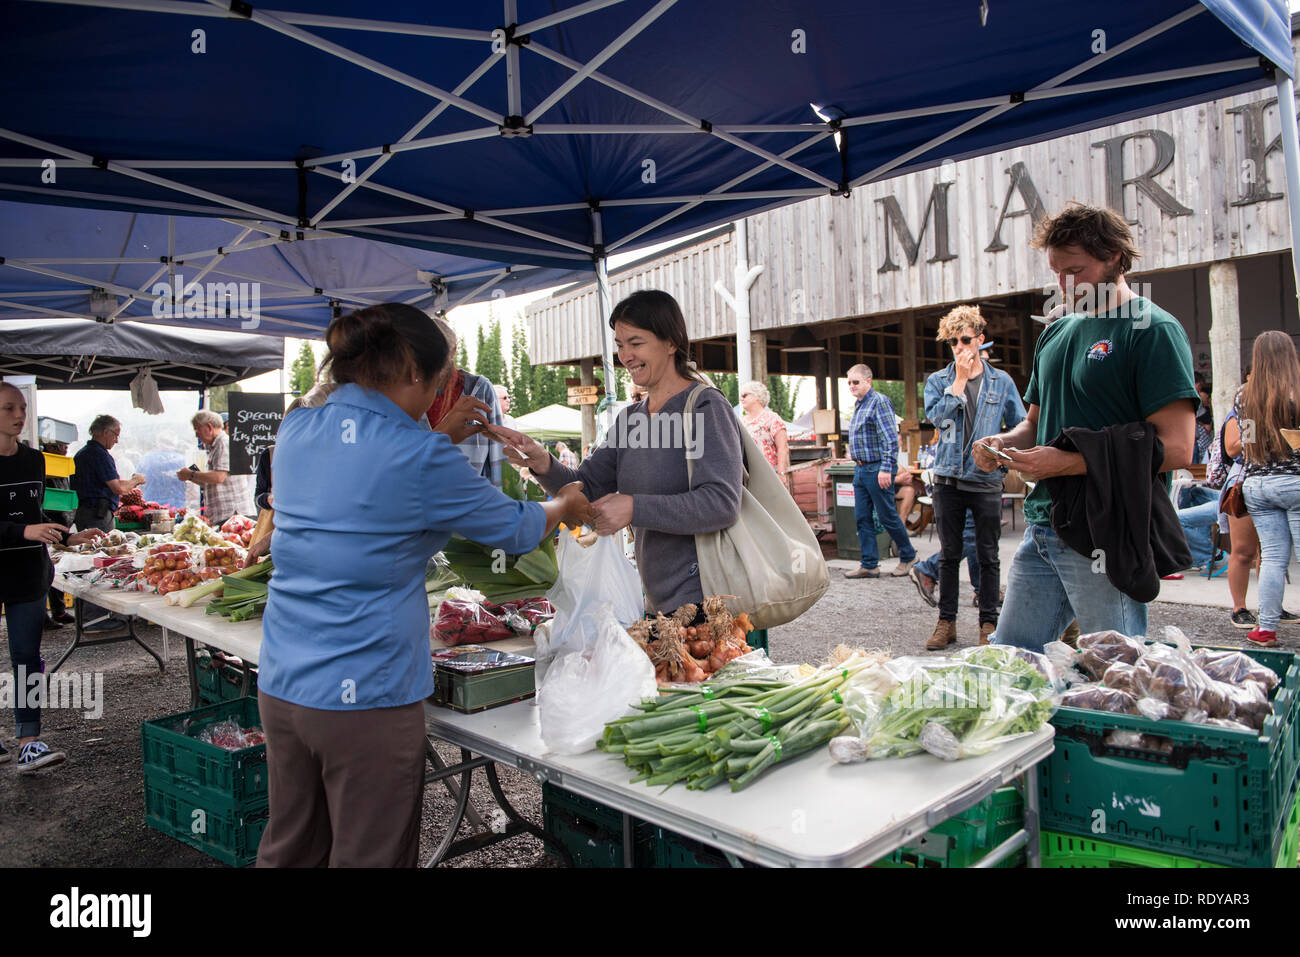 'Kericorn' stand from Waipapa grows primarily spray-free vegetables. The Old Packhouse Market is a popular weekly event on Saturdays in Kerikeri, Nort Stock Photo